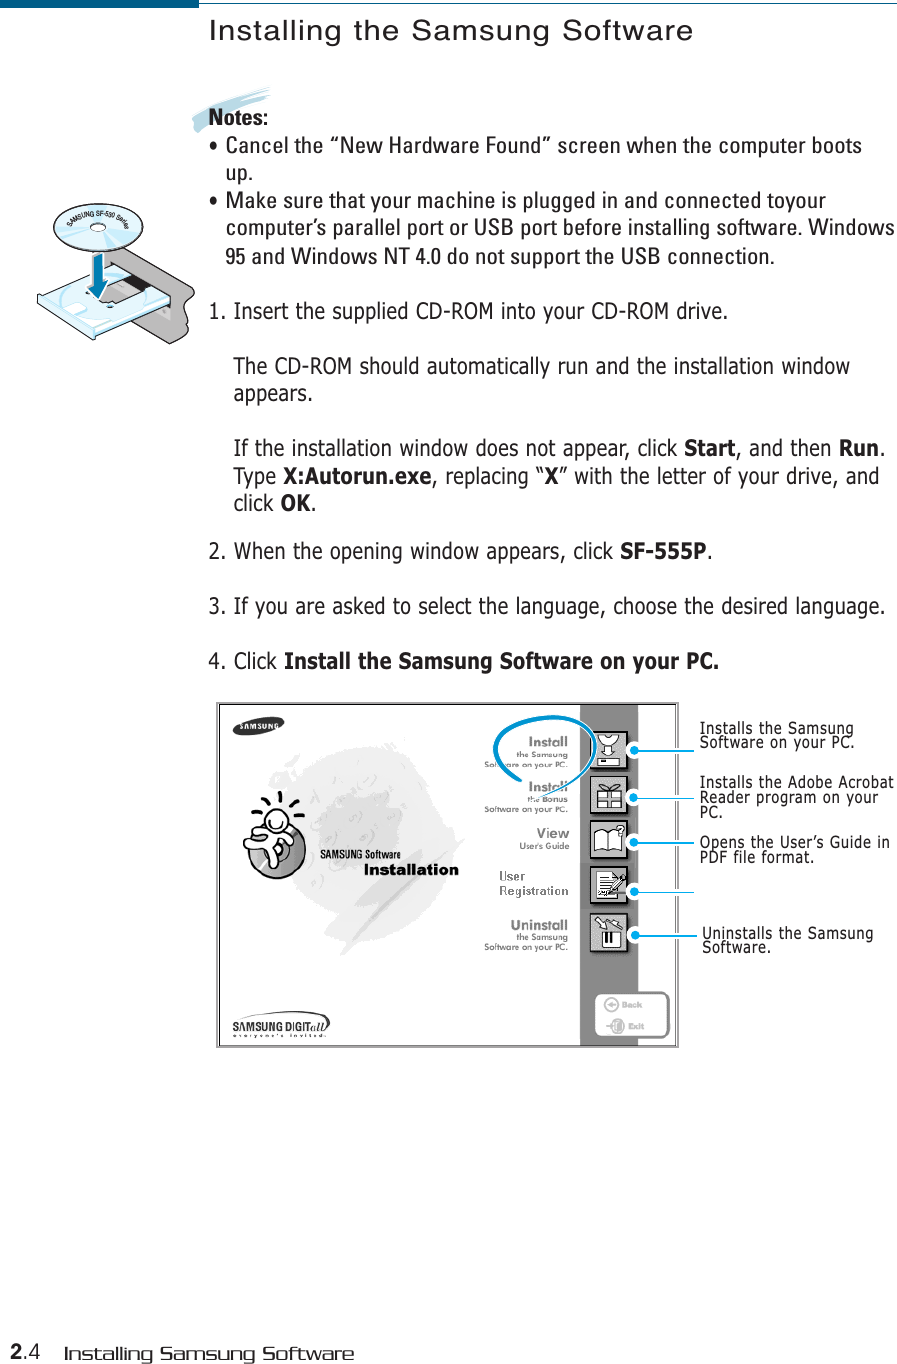 2.4 Installing Samsung SoftwareInstalling the Samsung SoftwareNotes:• Cancel the “New Hardware Found” screen when the computer bootsup.• Make sure that your machine is plugged in and connected toyourcomputer’s parallel port or USB port before installing software. Windows95 and Windows NT 4.0 do not support the USB connection.1. Insert the supplied CD-ROM into your CD-ROM drive.The CD-ROM should automatically run and the installation windowappears.If the installation window does not appear, click Start, and then Run.Type X:Autorun.exe, replacing “X” with the letter of your drive, andclick OK.2. When the opening window appears, click SF-555P.3. If you are asked to select the language, choose the desired language.4. Click Install the Samsung Software on your PC.Installs the Adobe AcrobatReader program on yourPC.Opens the User’s Guide inPDF file format.SAMSUNGSF-530SeriesInstalls the SamsungSoftware on your PC.Uninstalls the SamsungSoftware.